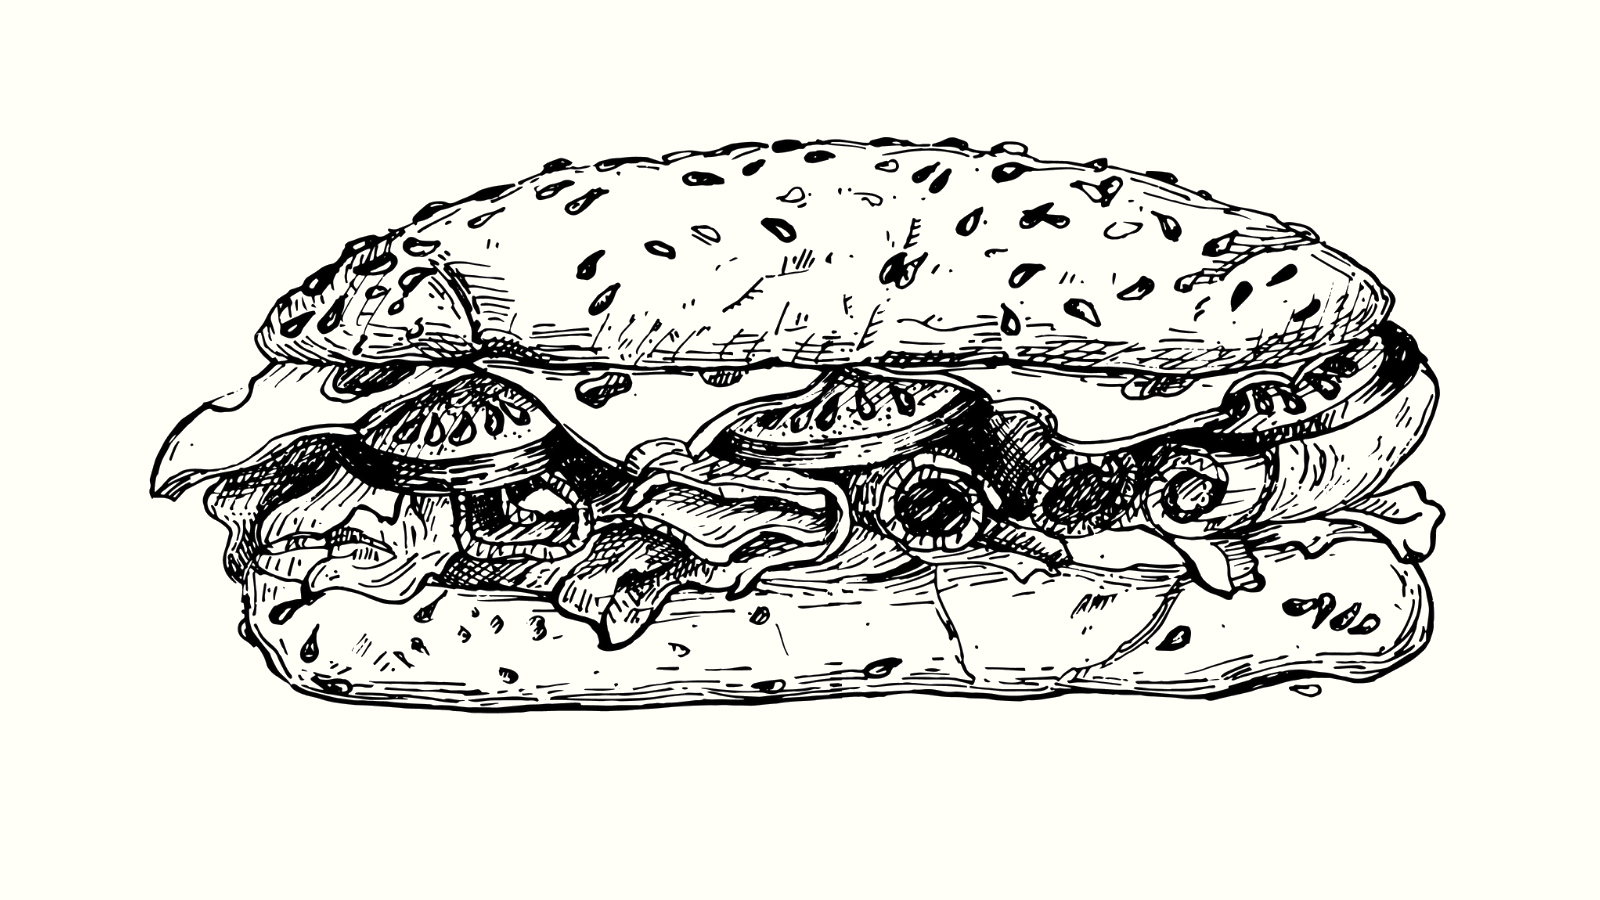 A black and white drawing of a sandwich sub.